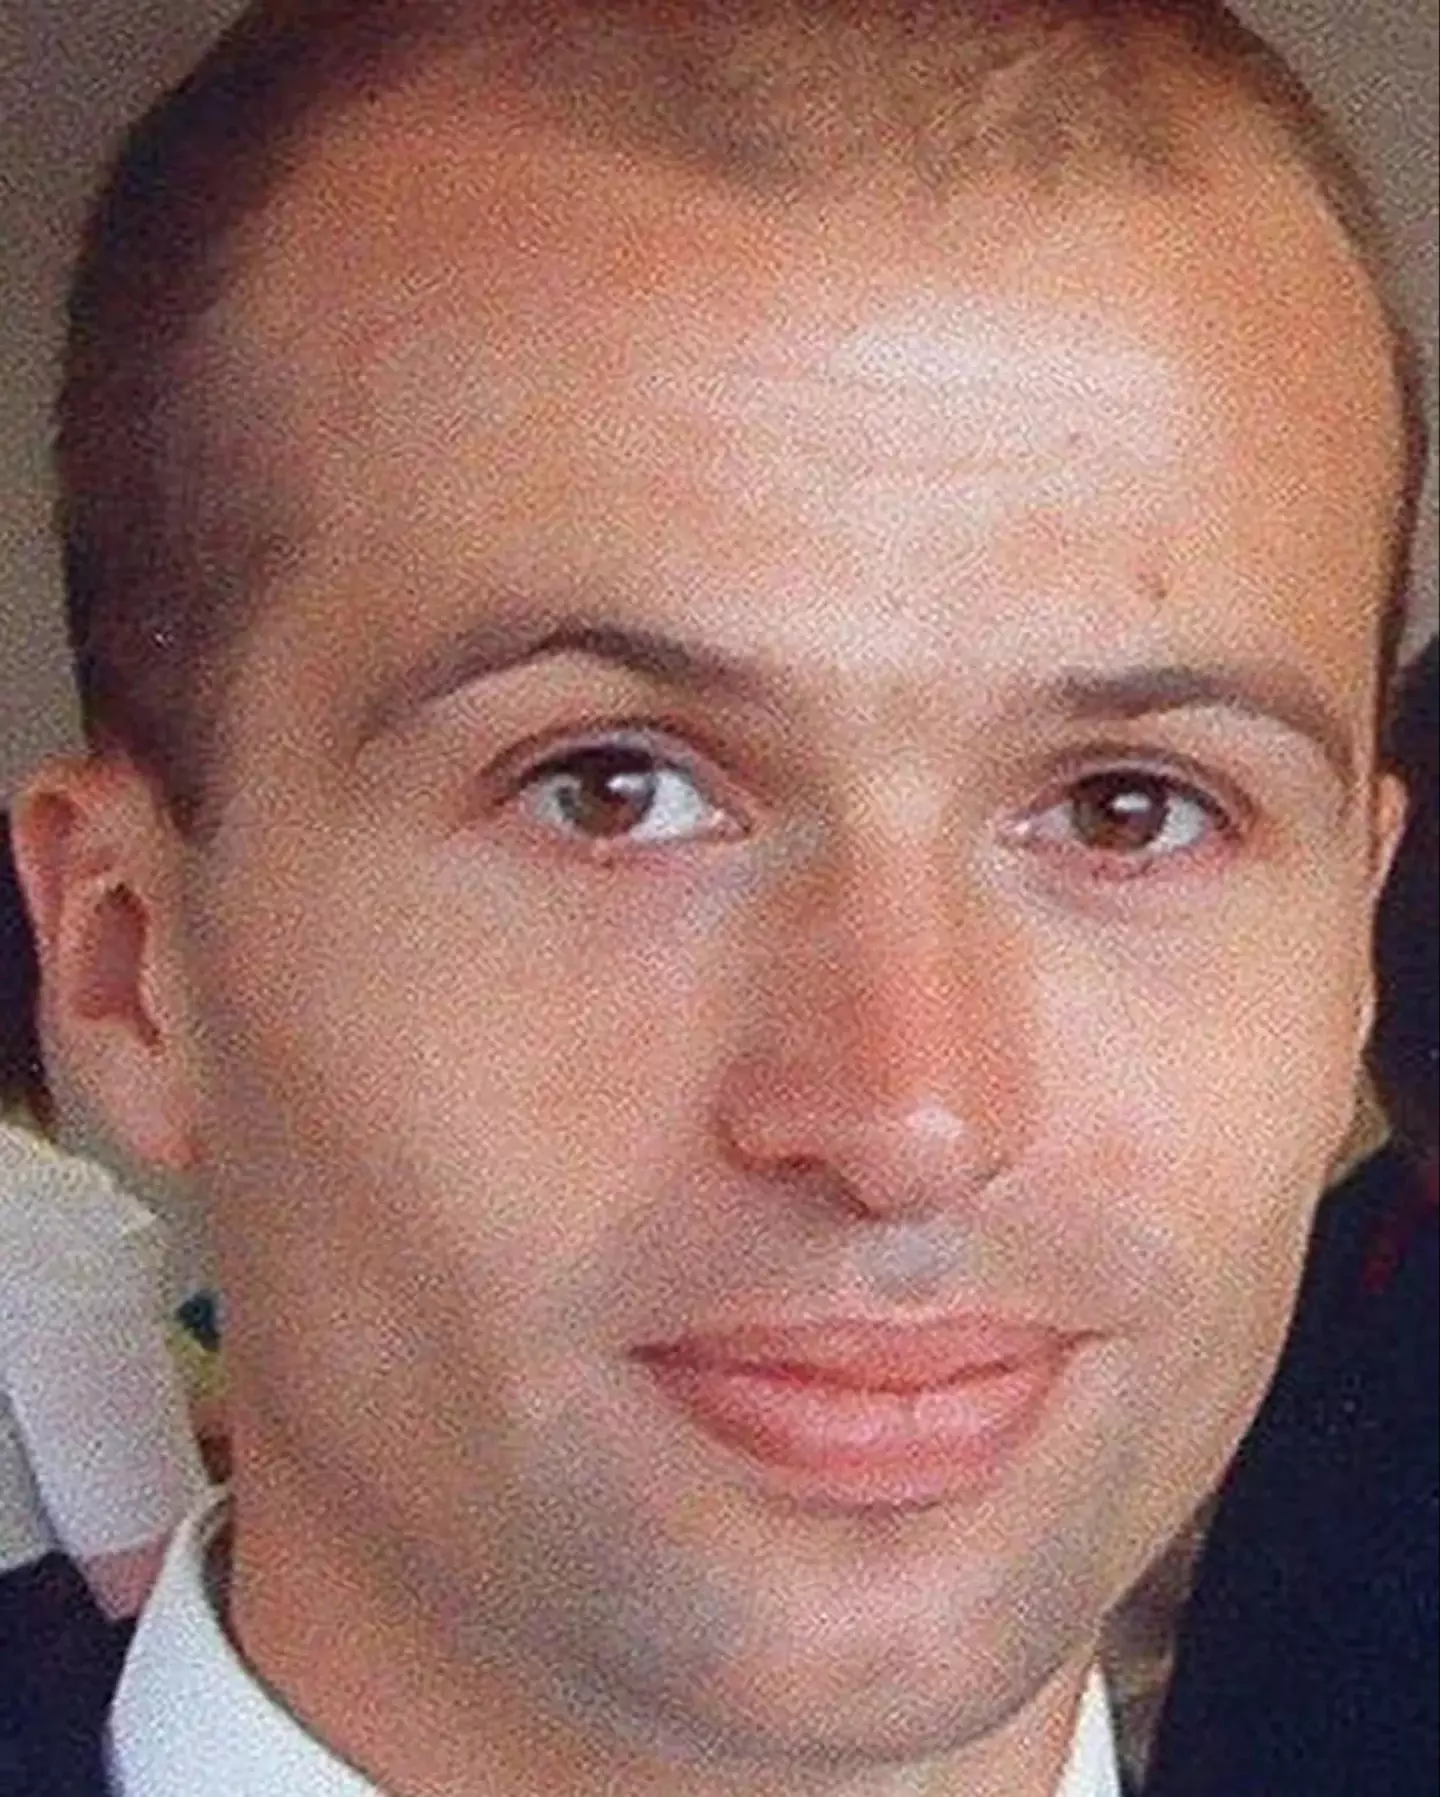 Gareth Williams' mysterious death has baffled police for over a decade.